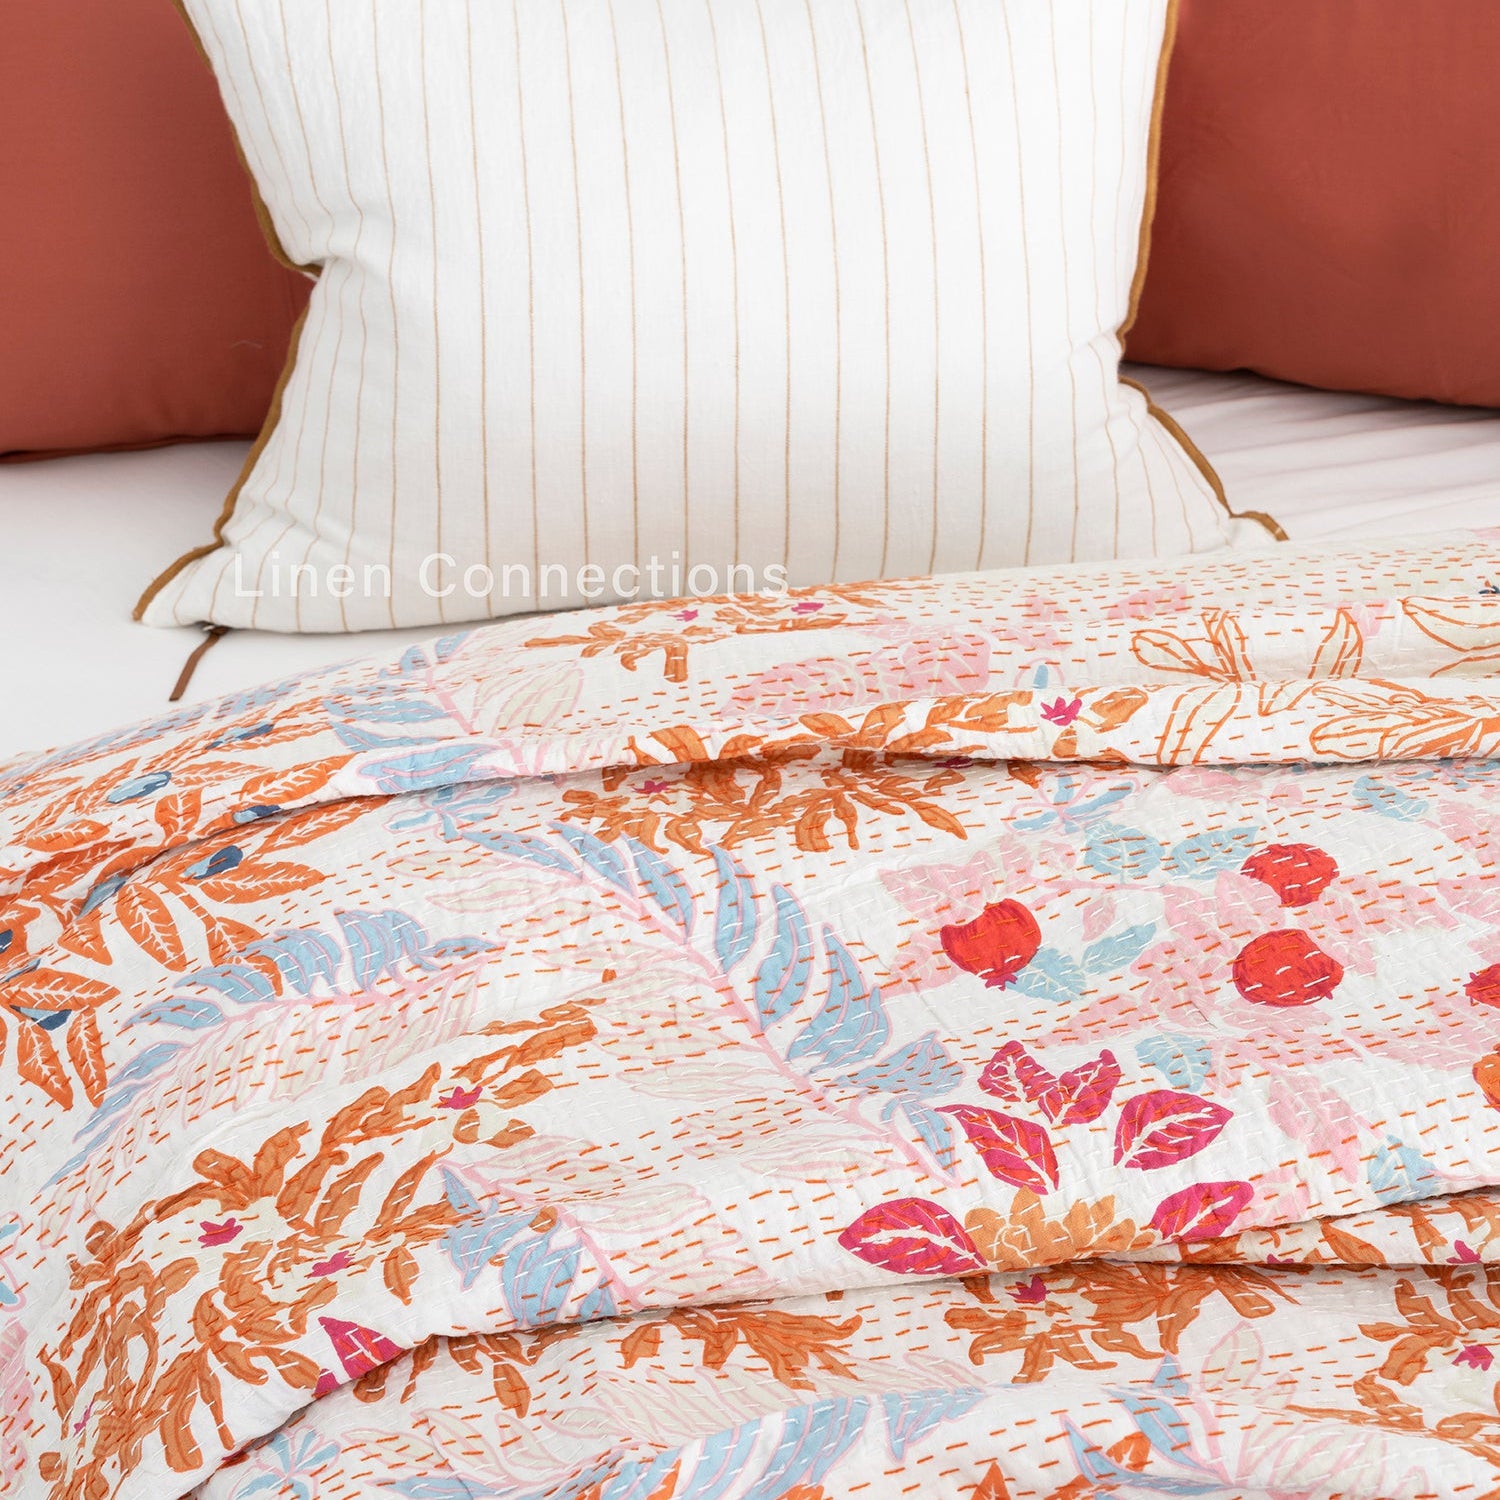 Linen Connections Indian Kantha Quilt - White Pastures